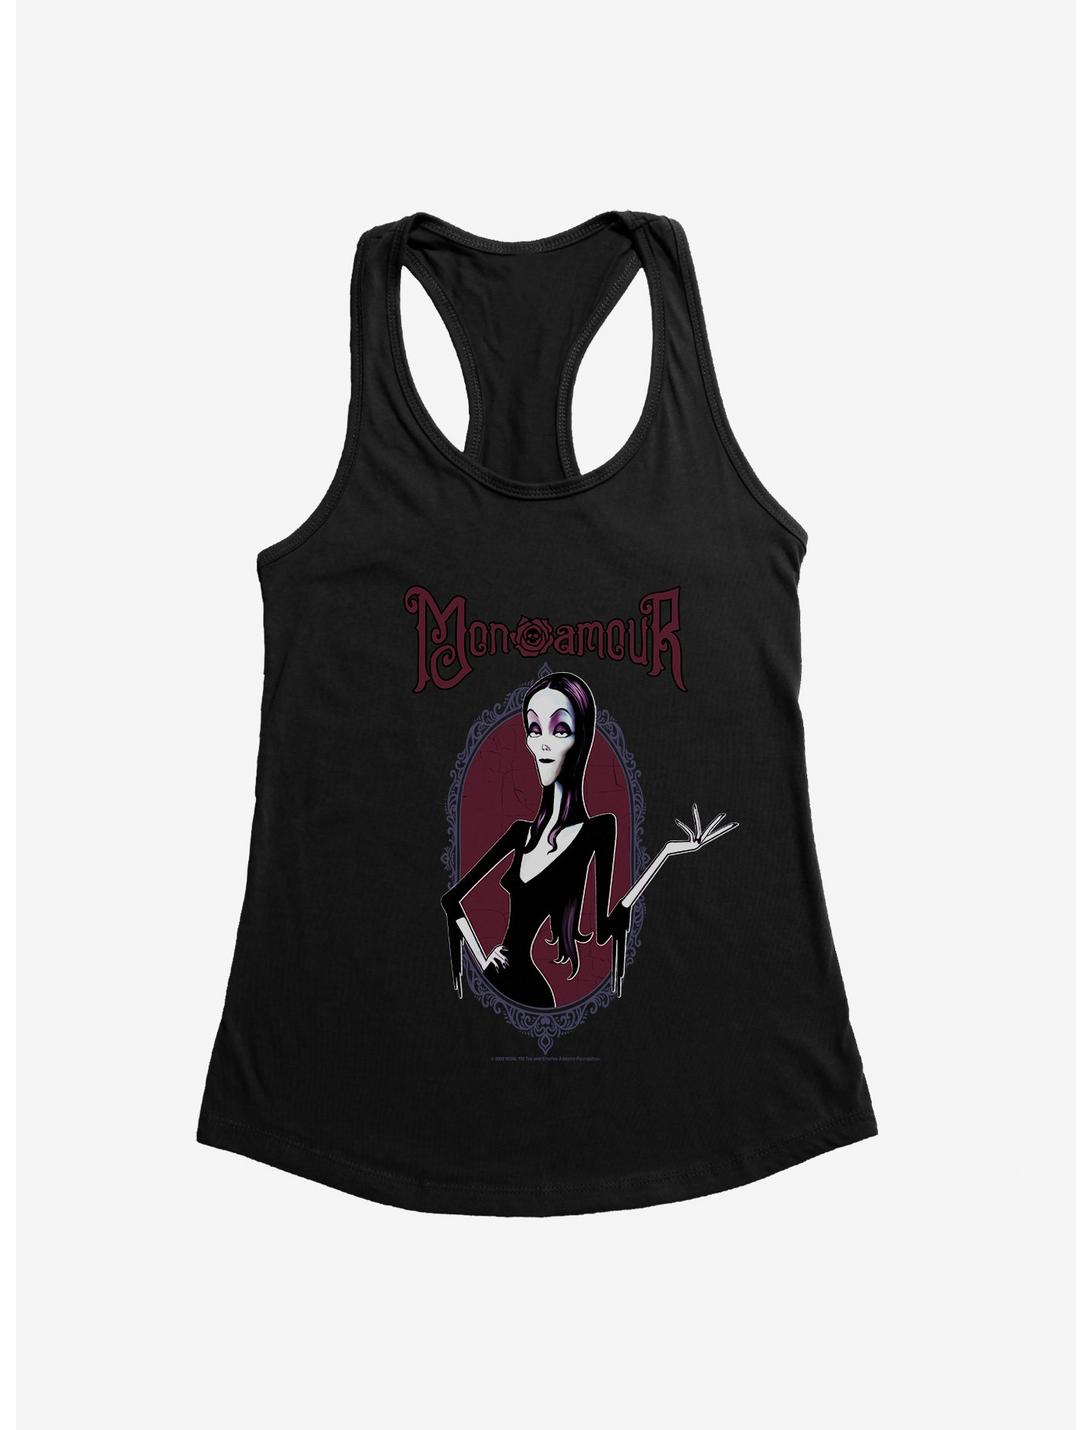 Addams Family Movie Mon Amour Womens Tank Top, BLACK, hi-res